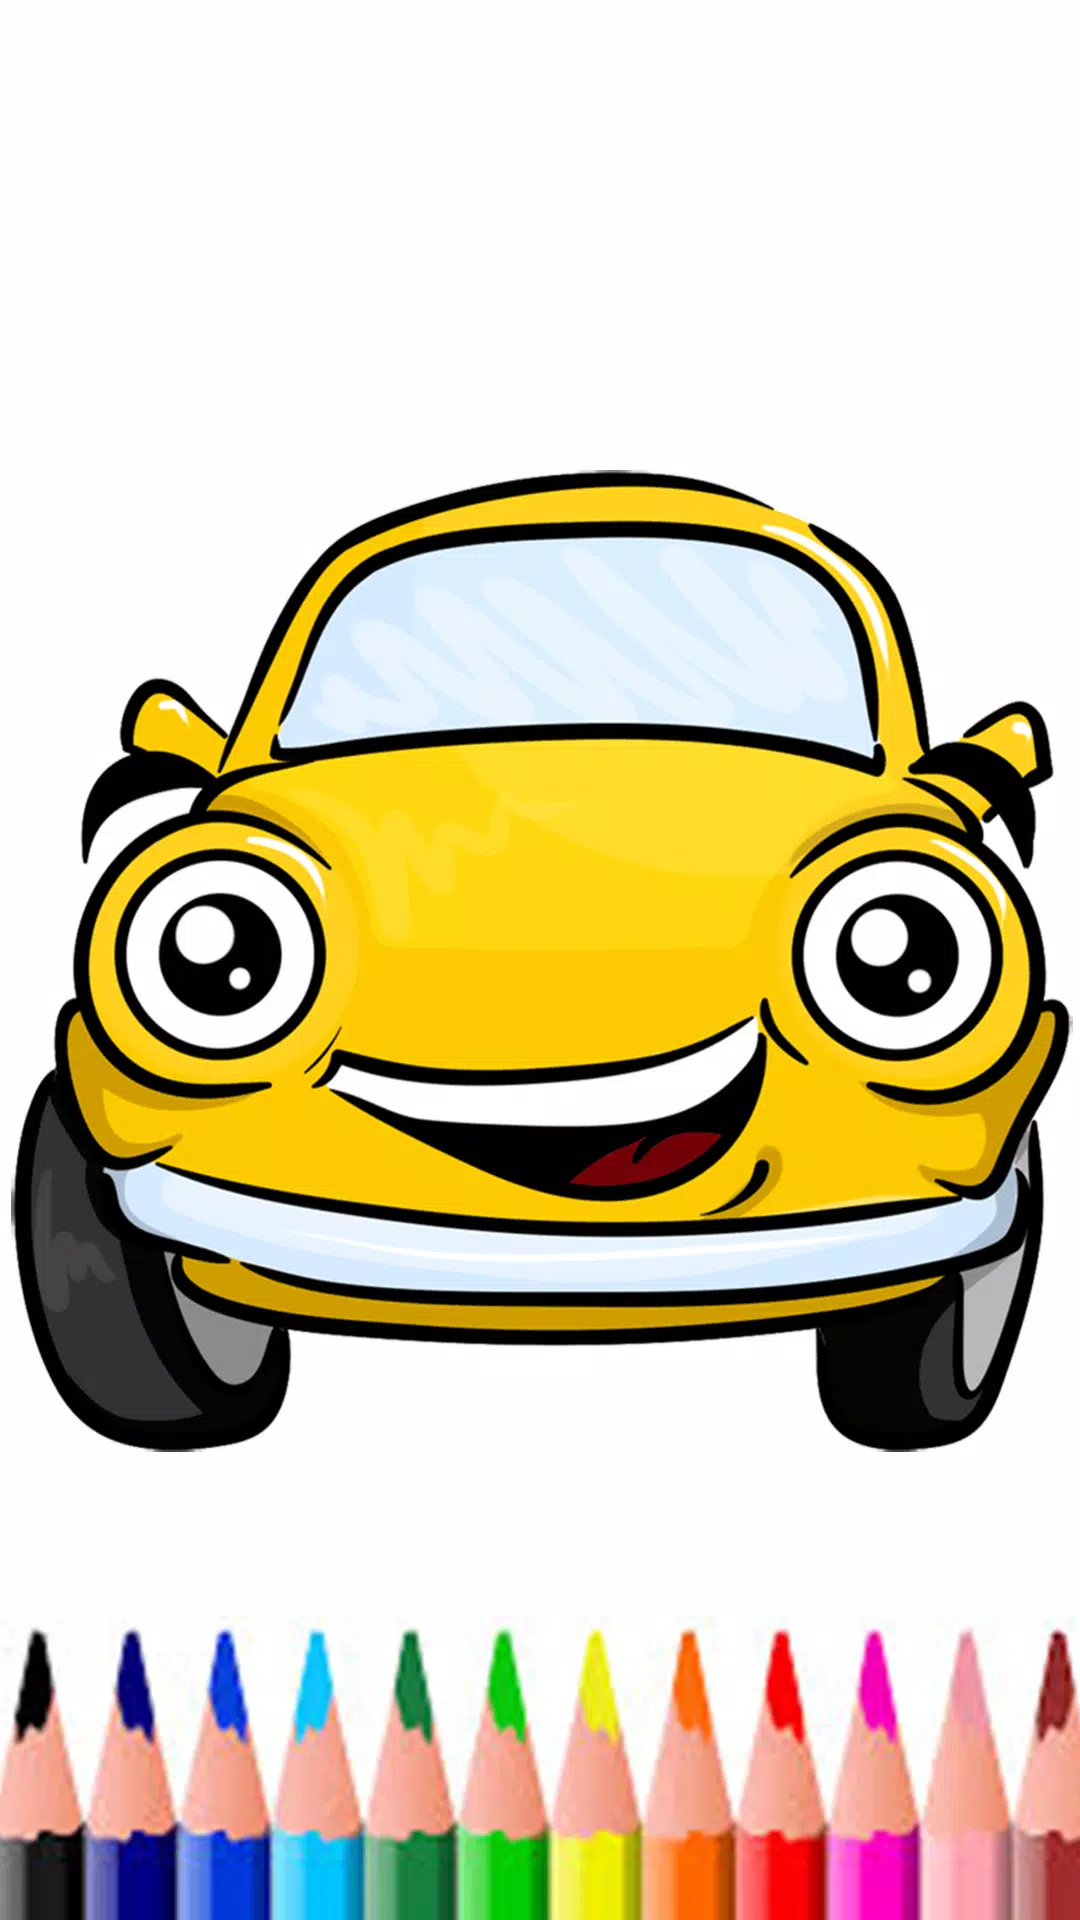 Tải xuống APK Learn how to draw a car cartoon cho Android